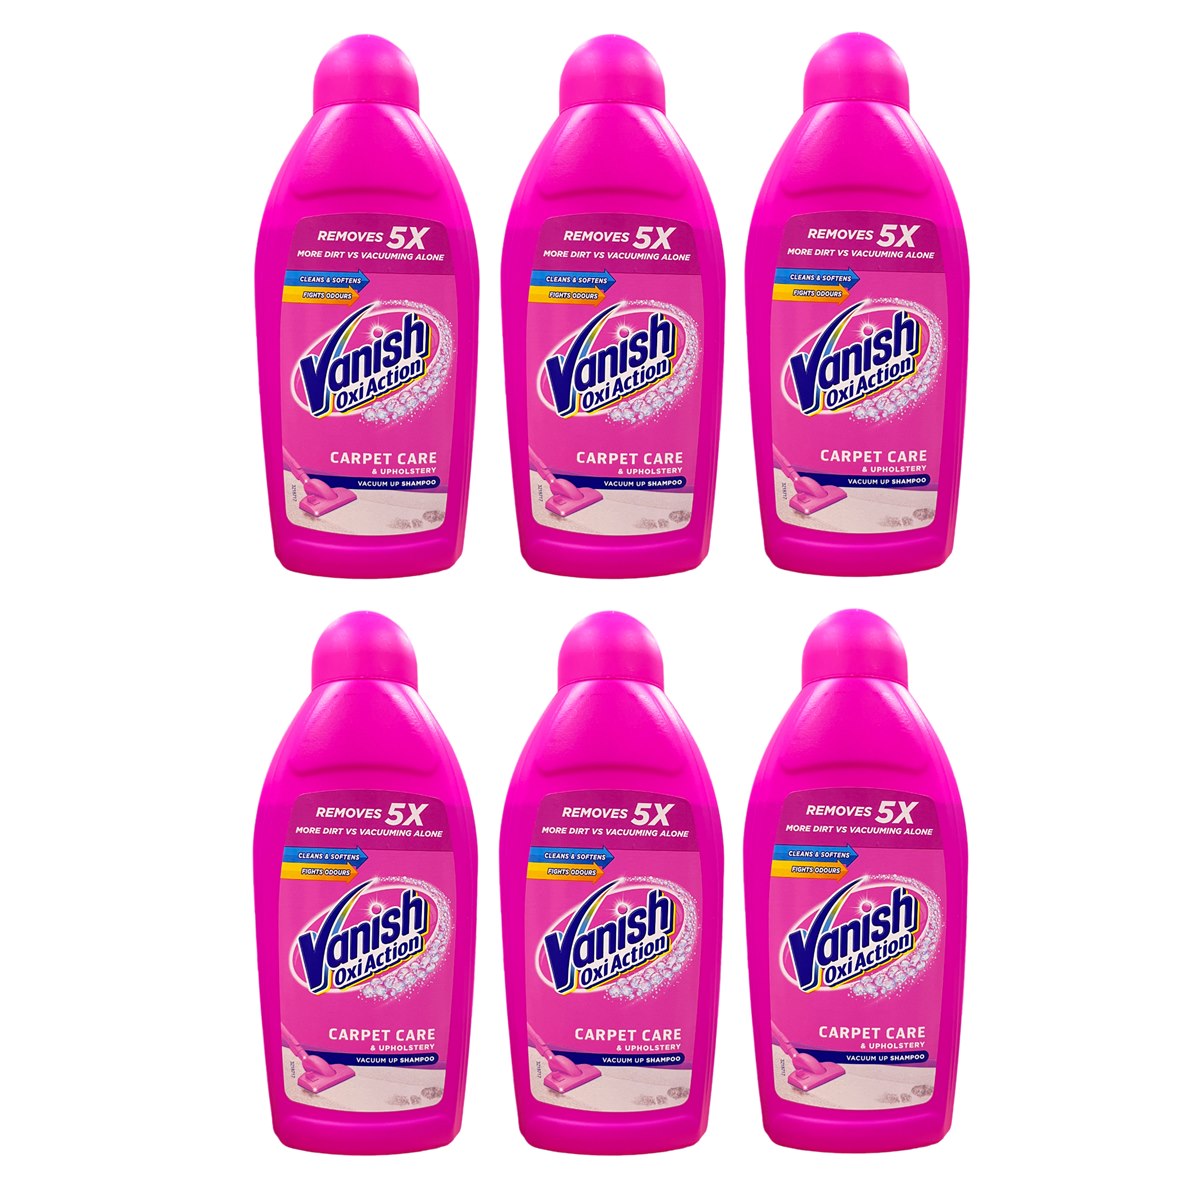 Case of 6 x Vanish Oxi Action Hand Carpet and Upholstery Care Shampoo 450ml